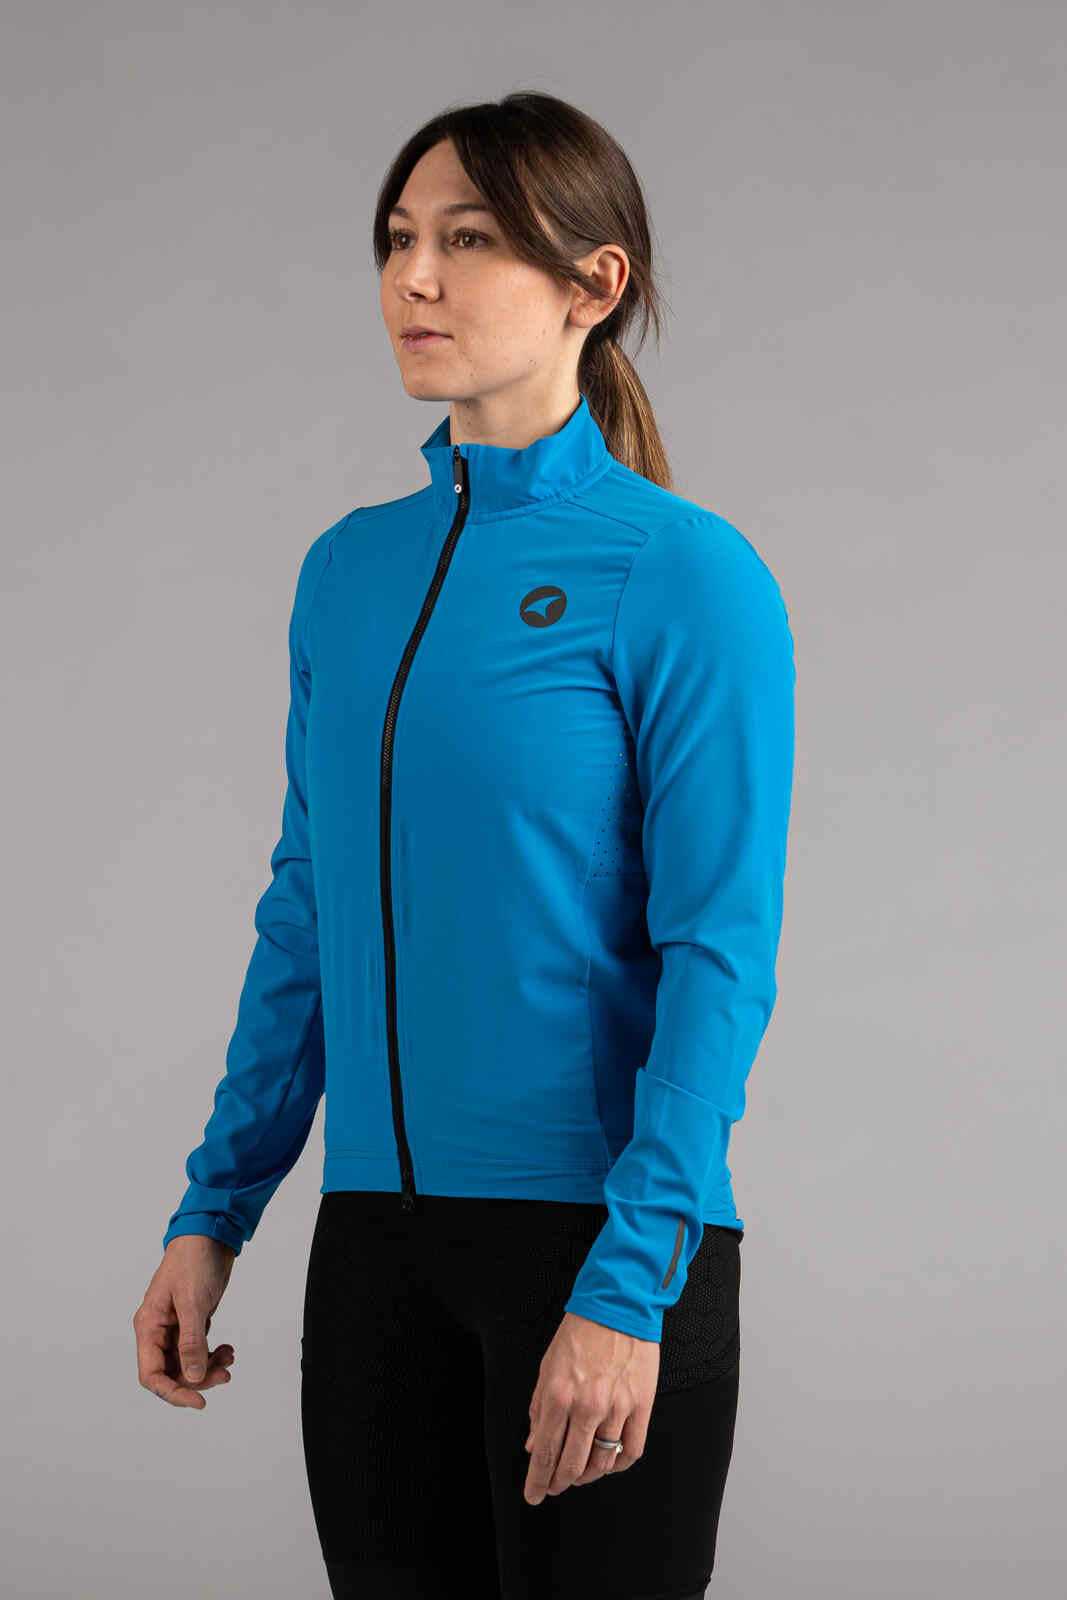 Women's Lightweight Blue Summit Shell Cycling Jacket - Front View